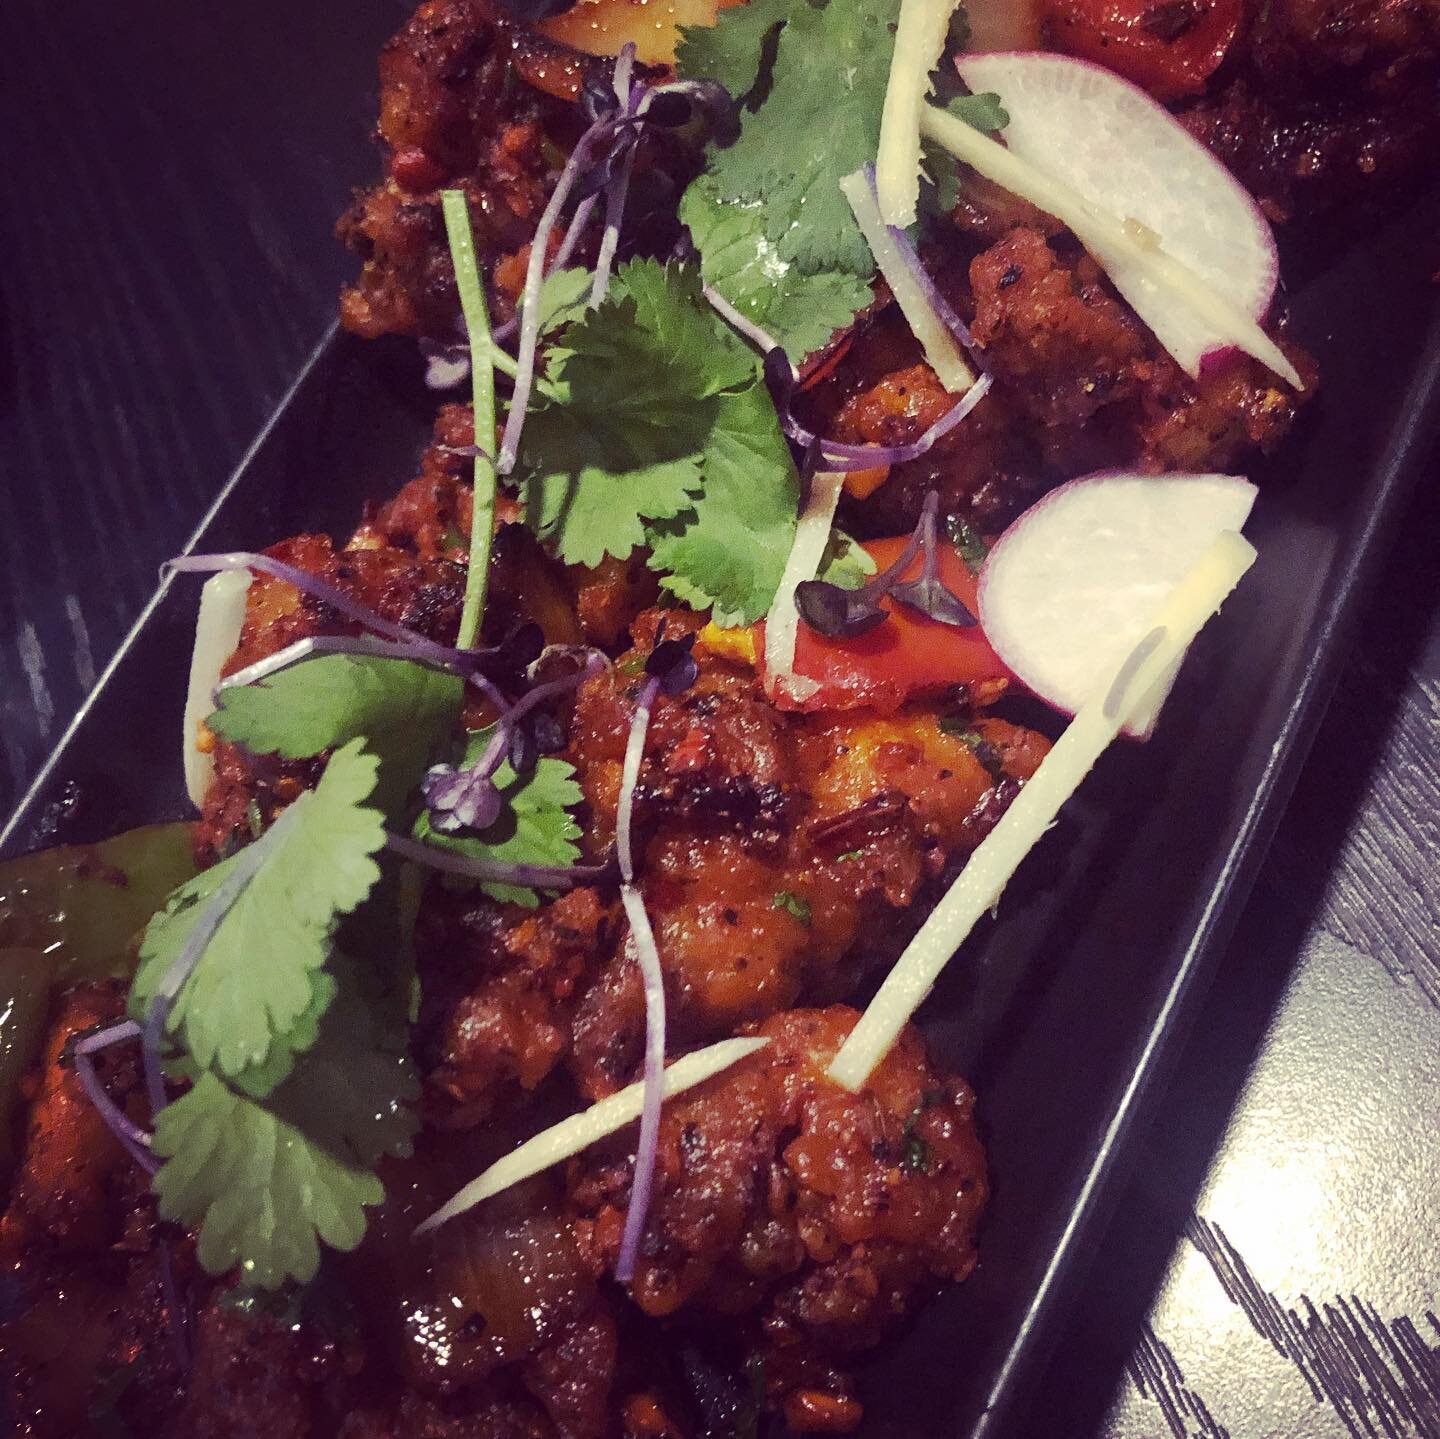 Big Tikka is a pricey contemporary Indian restaurant in Takapuna. The atmosphere and decor is spectacular with an open kitchen, but the food and prices were a disappointment. Although the entrees were delicious, the curries were flavourless. I went h